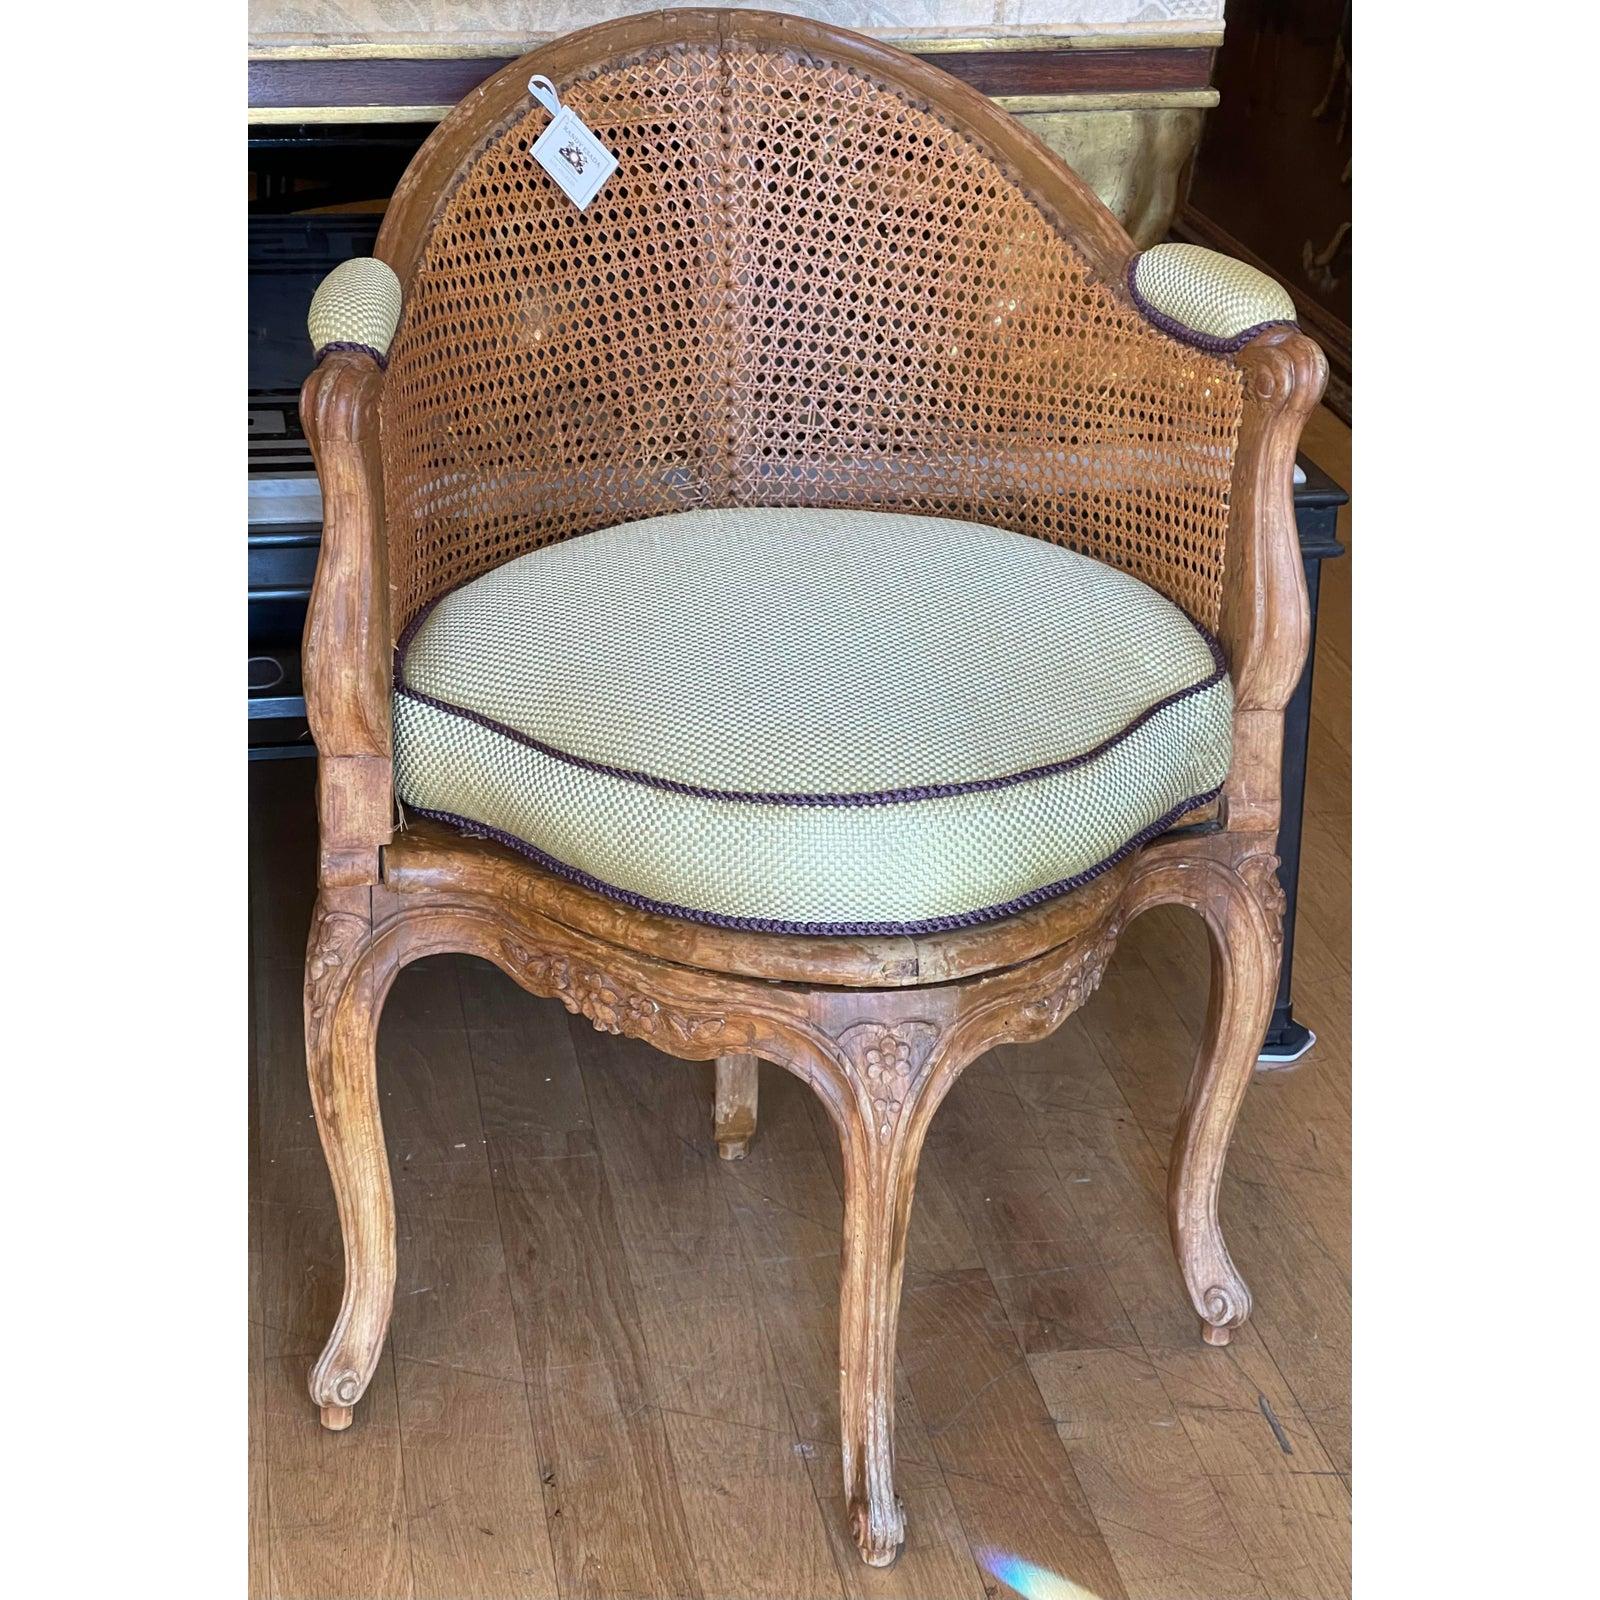 Antique 18th C Louis XV Caned corner chair

Additional information:
Materials: Caning
Color: Olive
Period: 18th Century
Styles: Louis XV
Power Sources: 
Number of Seats: 1
Item Type: Vintage, Antique or Pre-owned
Dimensions: 24